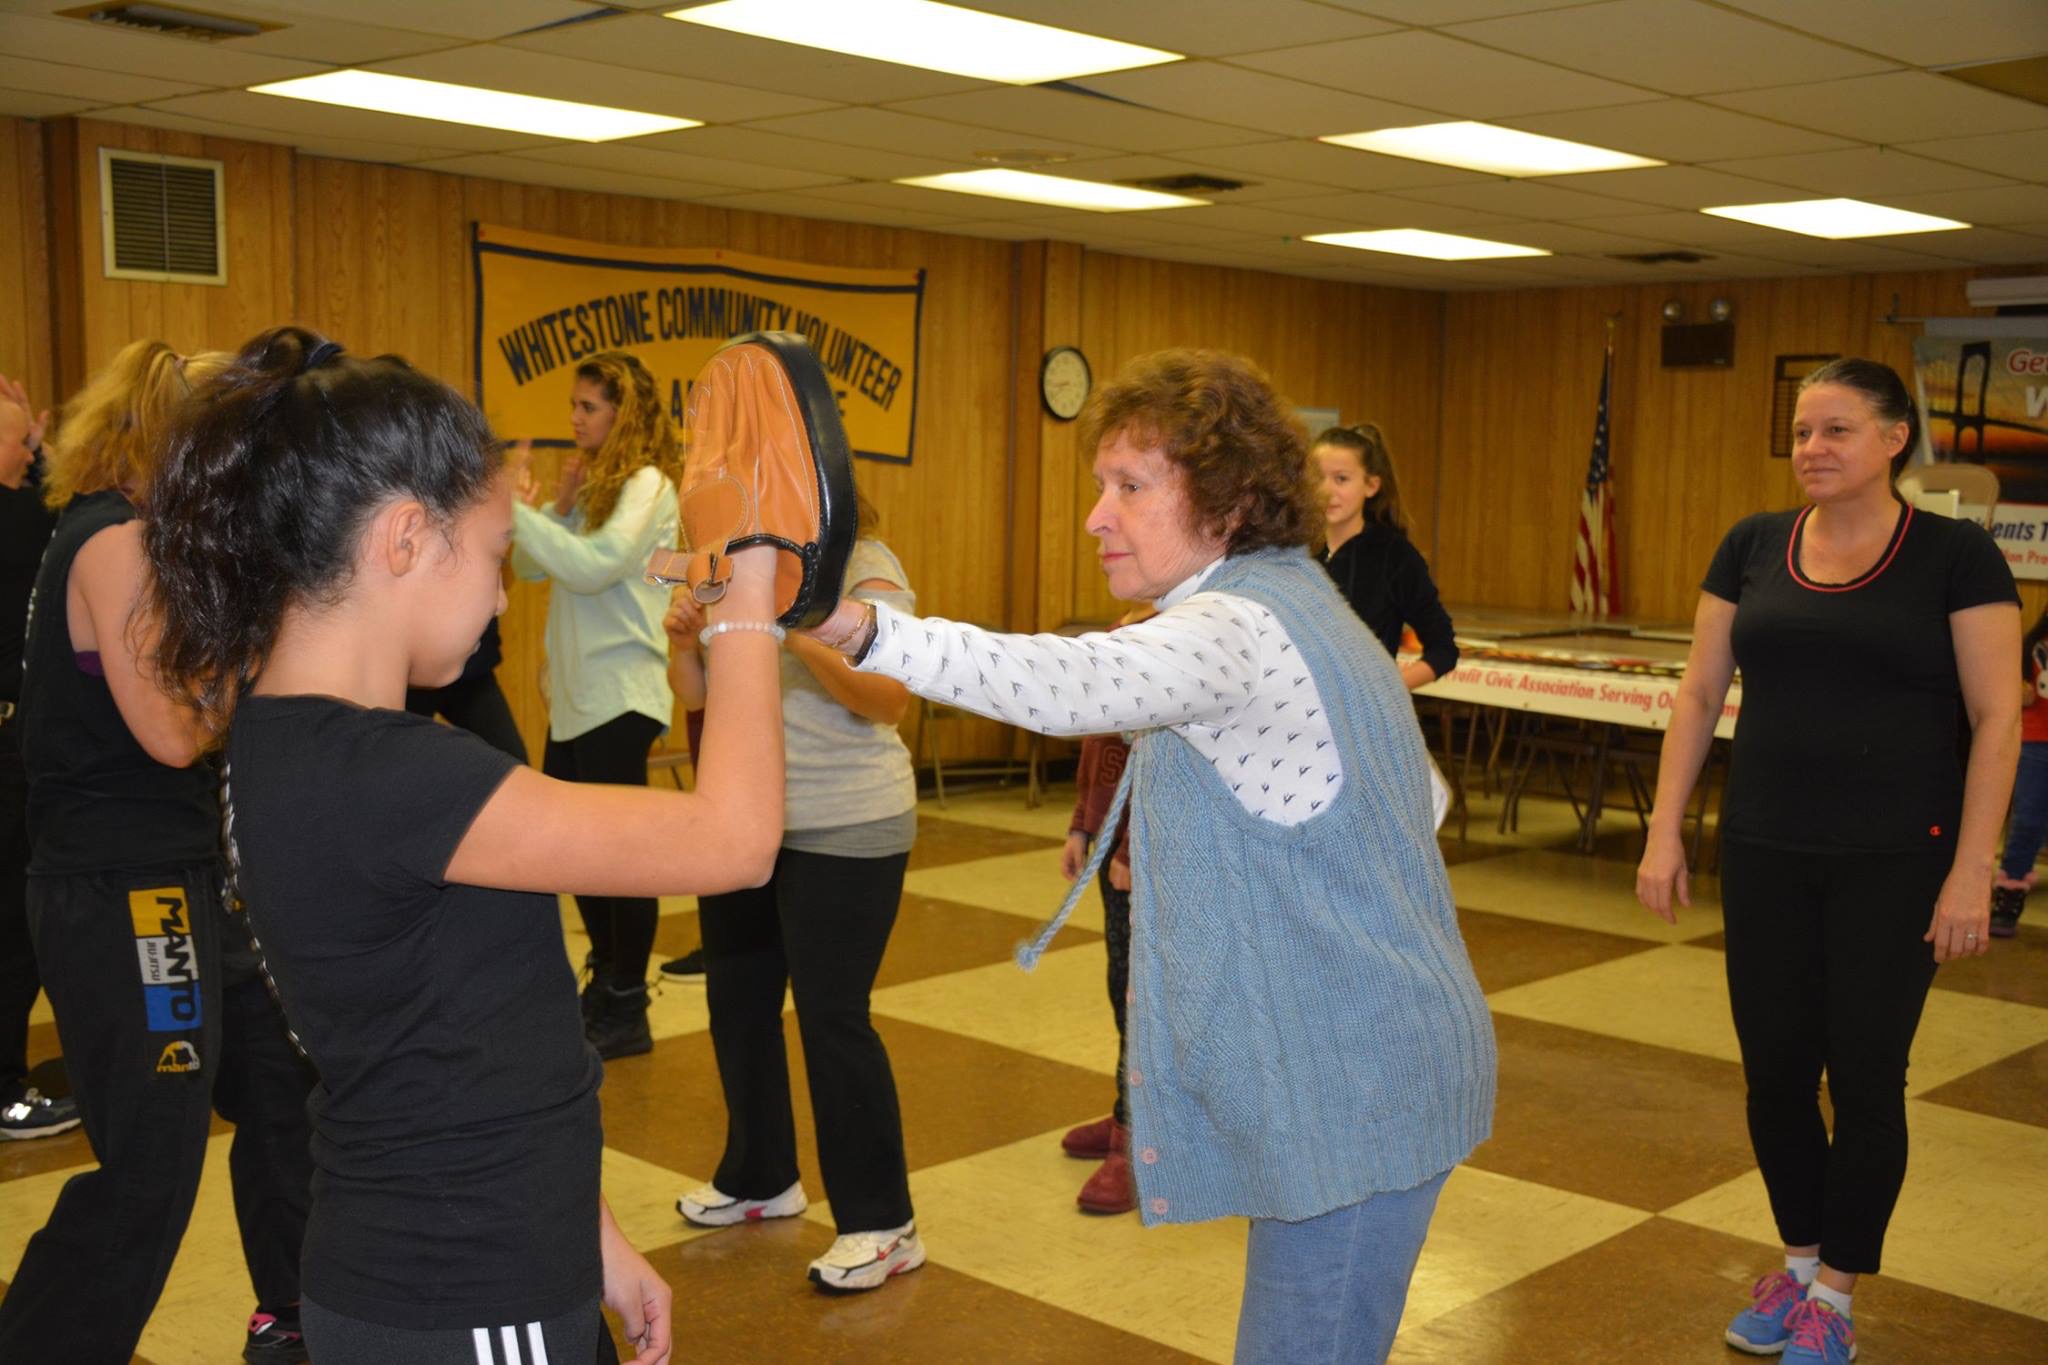 Female Whitestone residents utilizing techniques learned in the workshop.